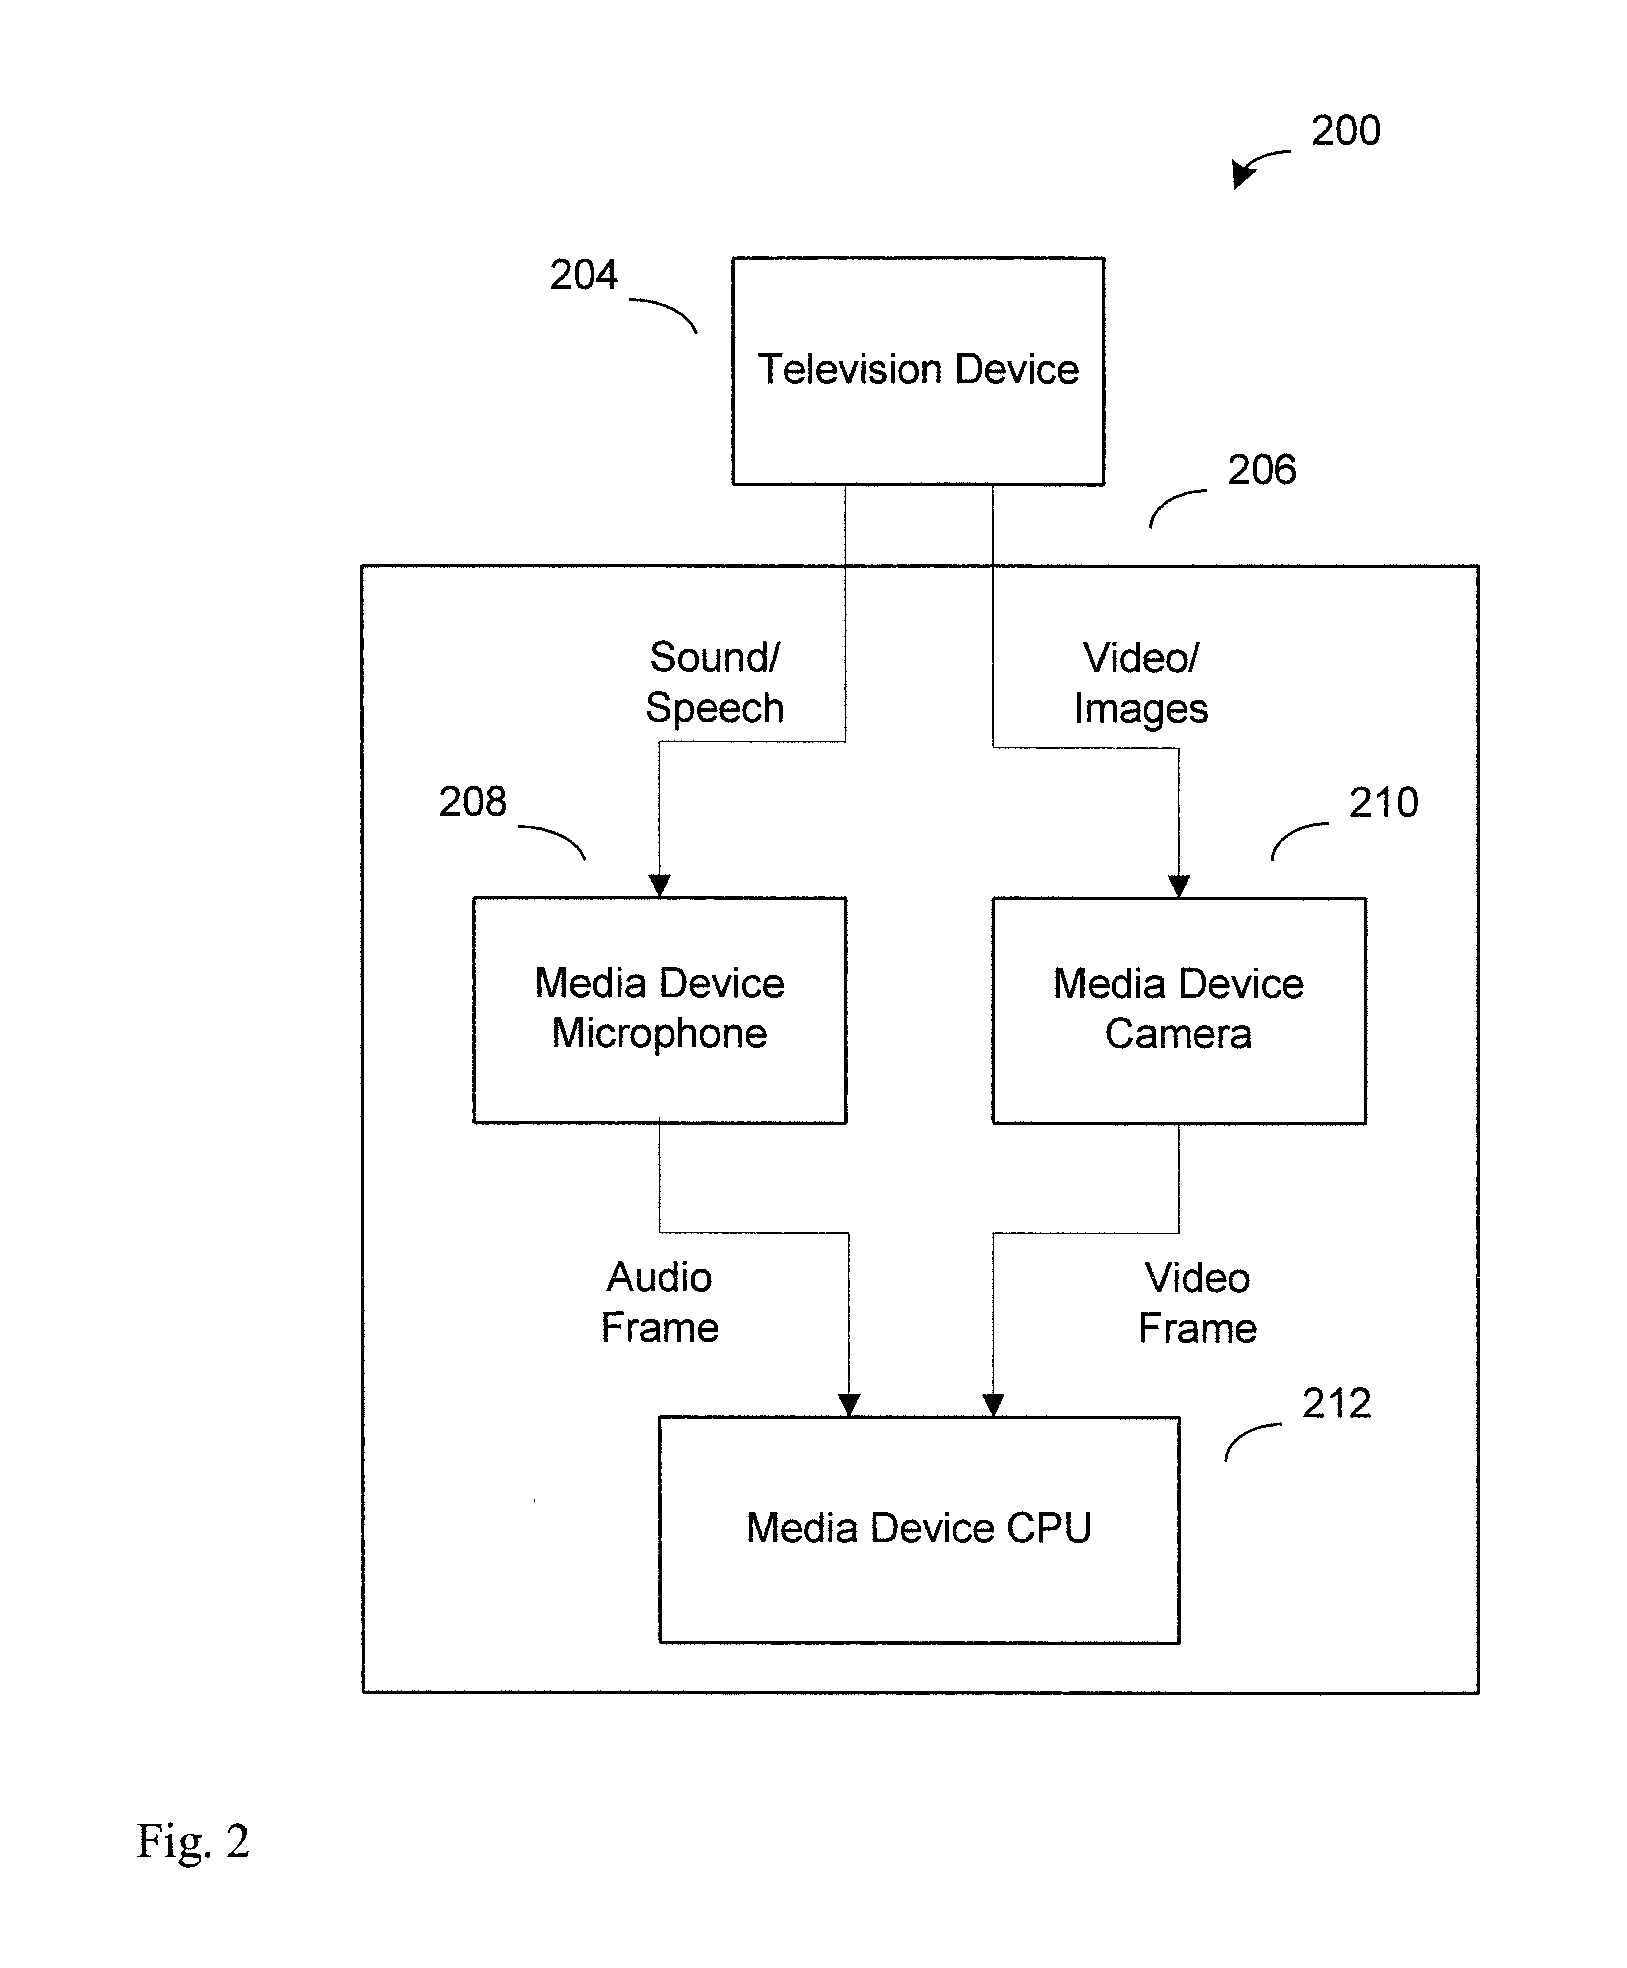 Method for Efficient Database Formation and Search on Media Devices Acting Synchronously with Television Programming